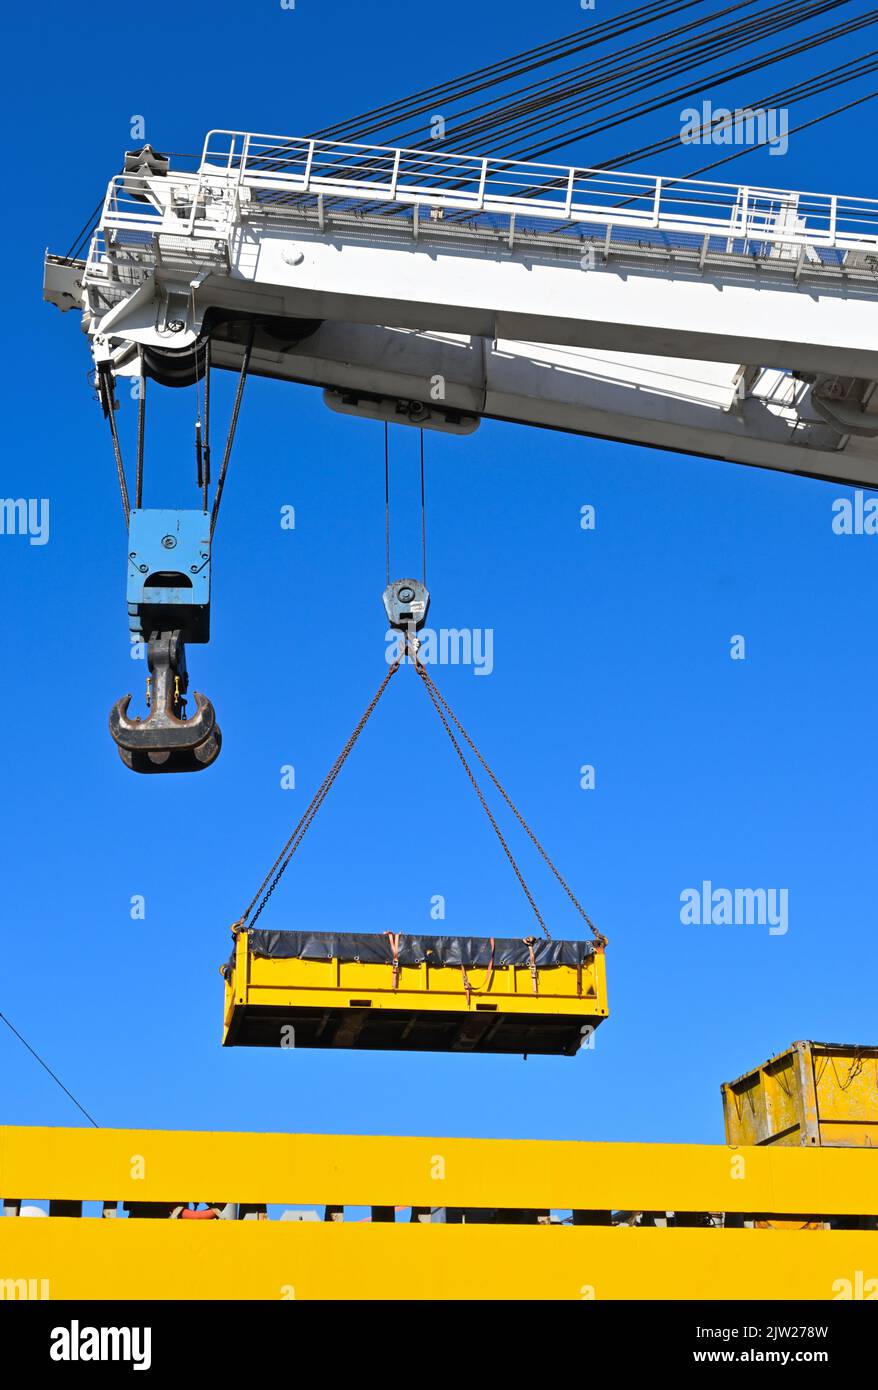 Yellow outdoor crane used in ship industry, electric overhead traveling crane above the vessel Stock Photo